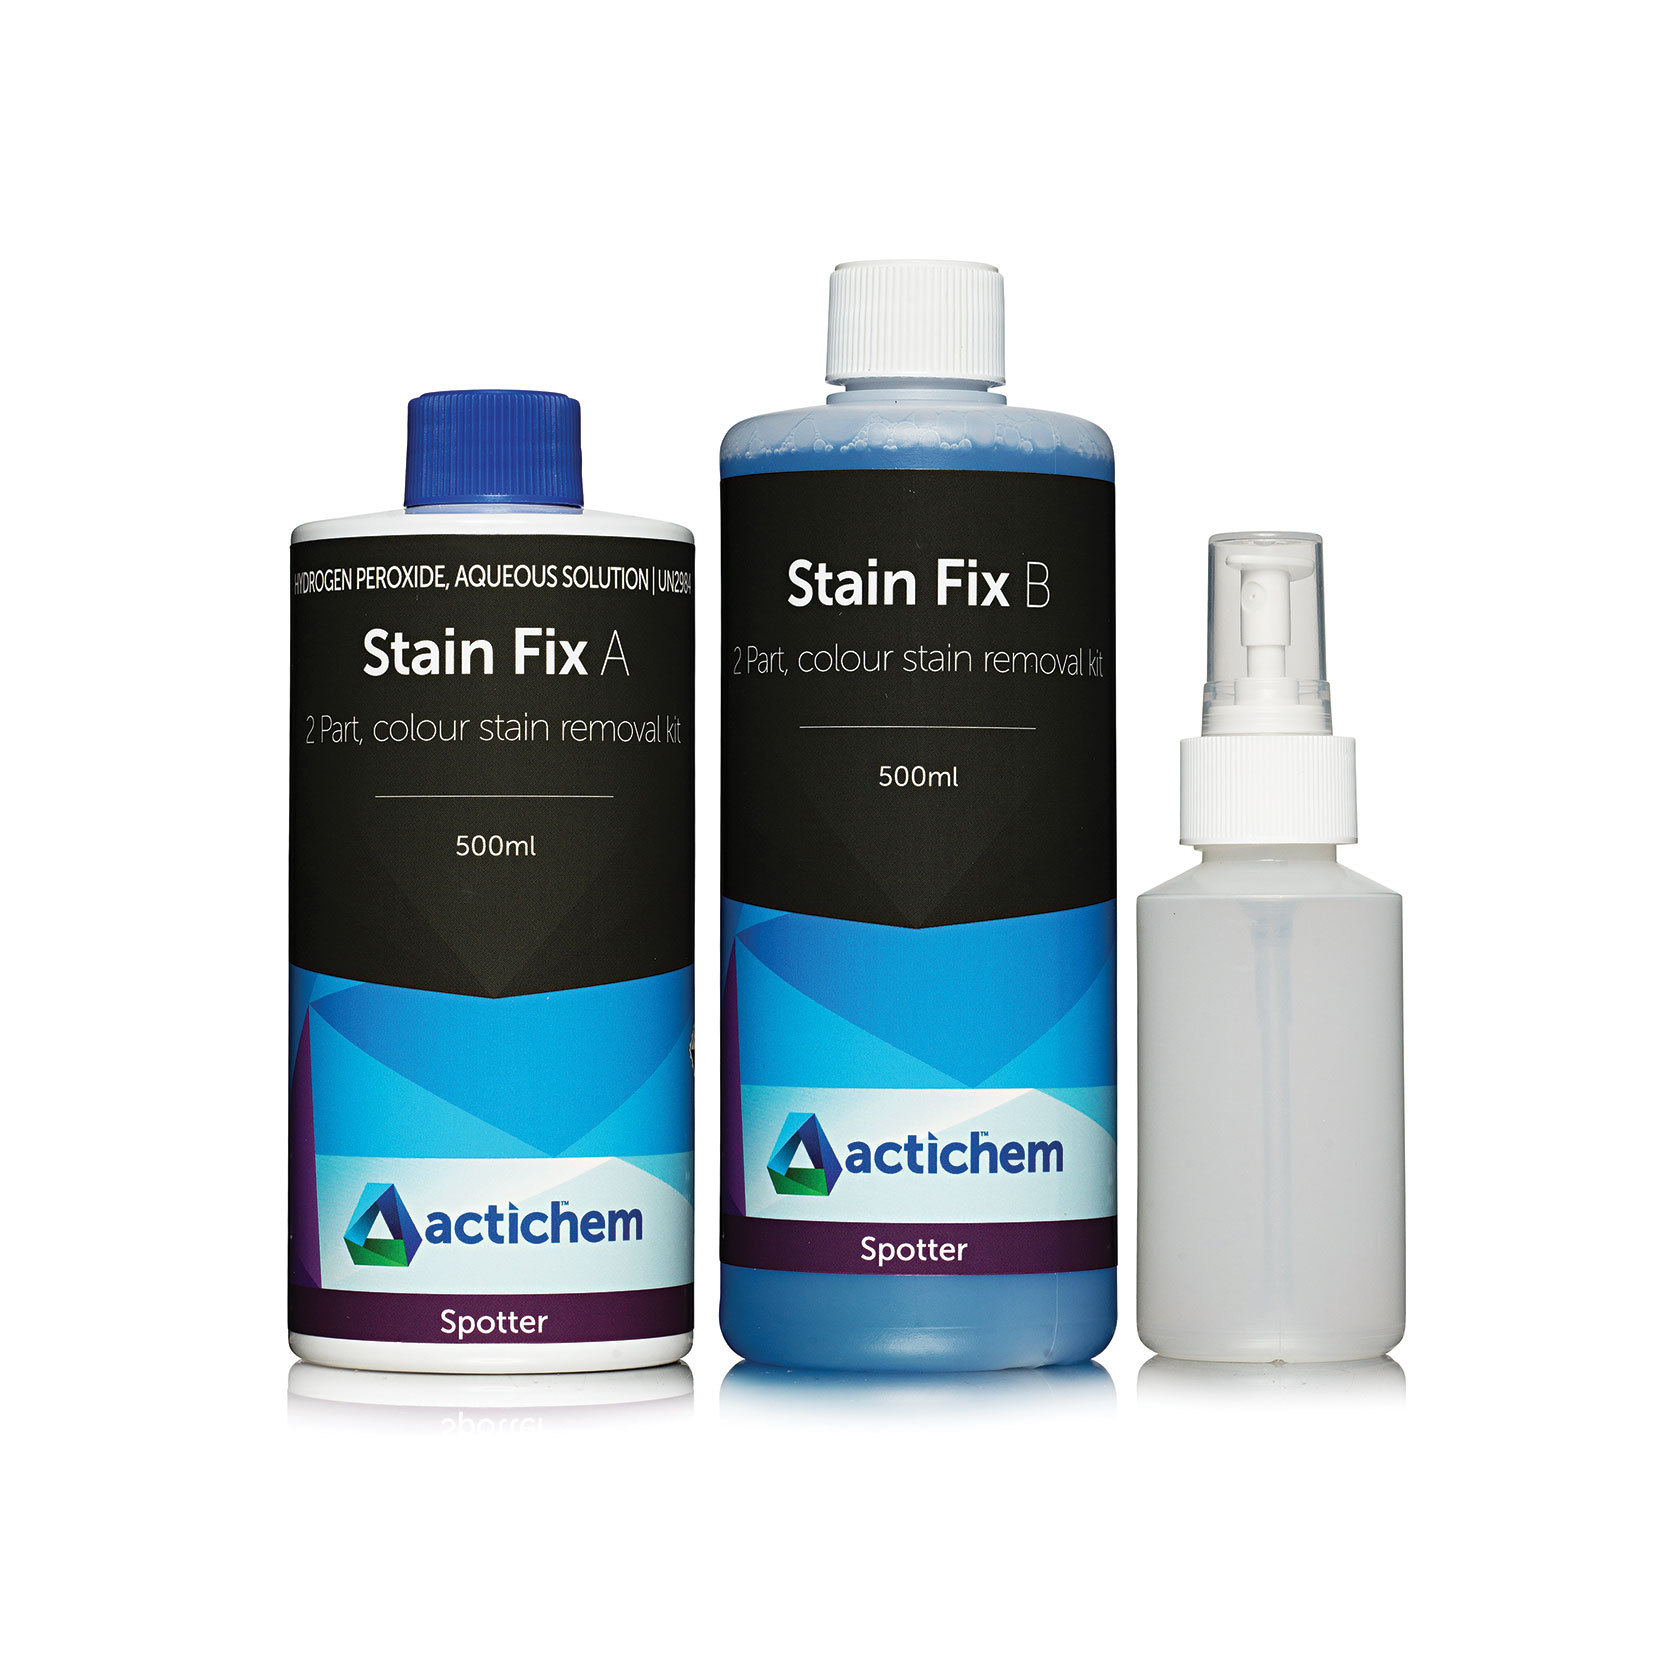 Actichem Stain Fix Colour stain removal kit